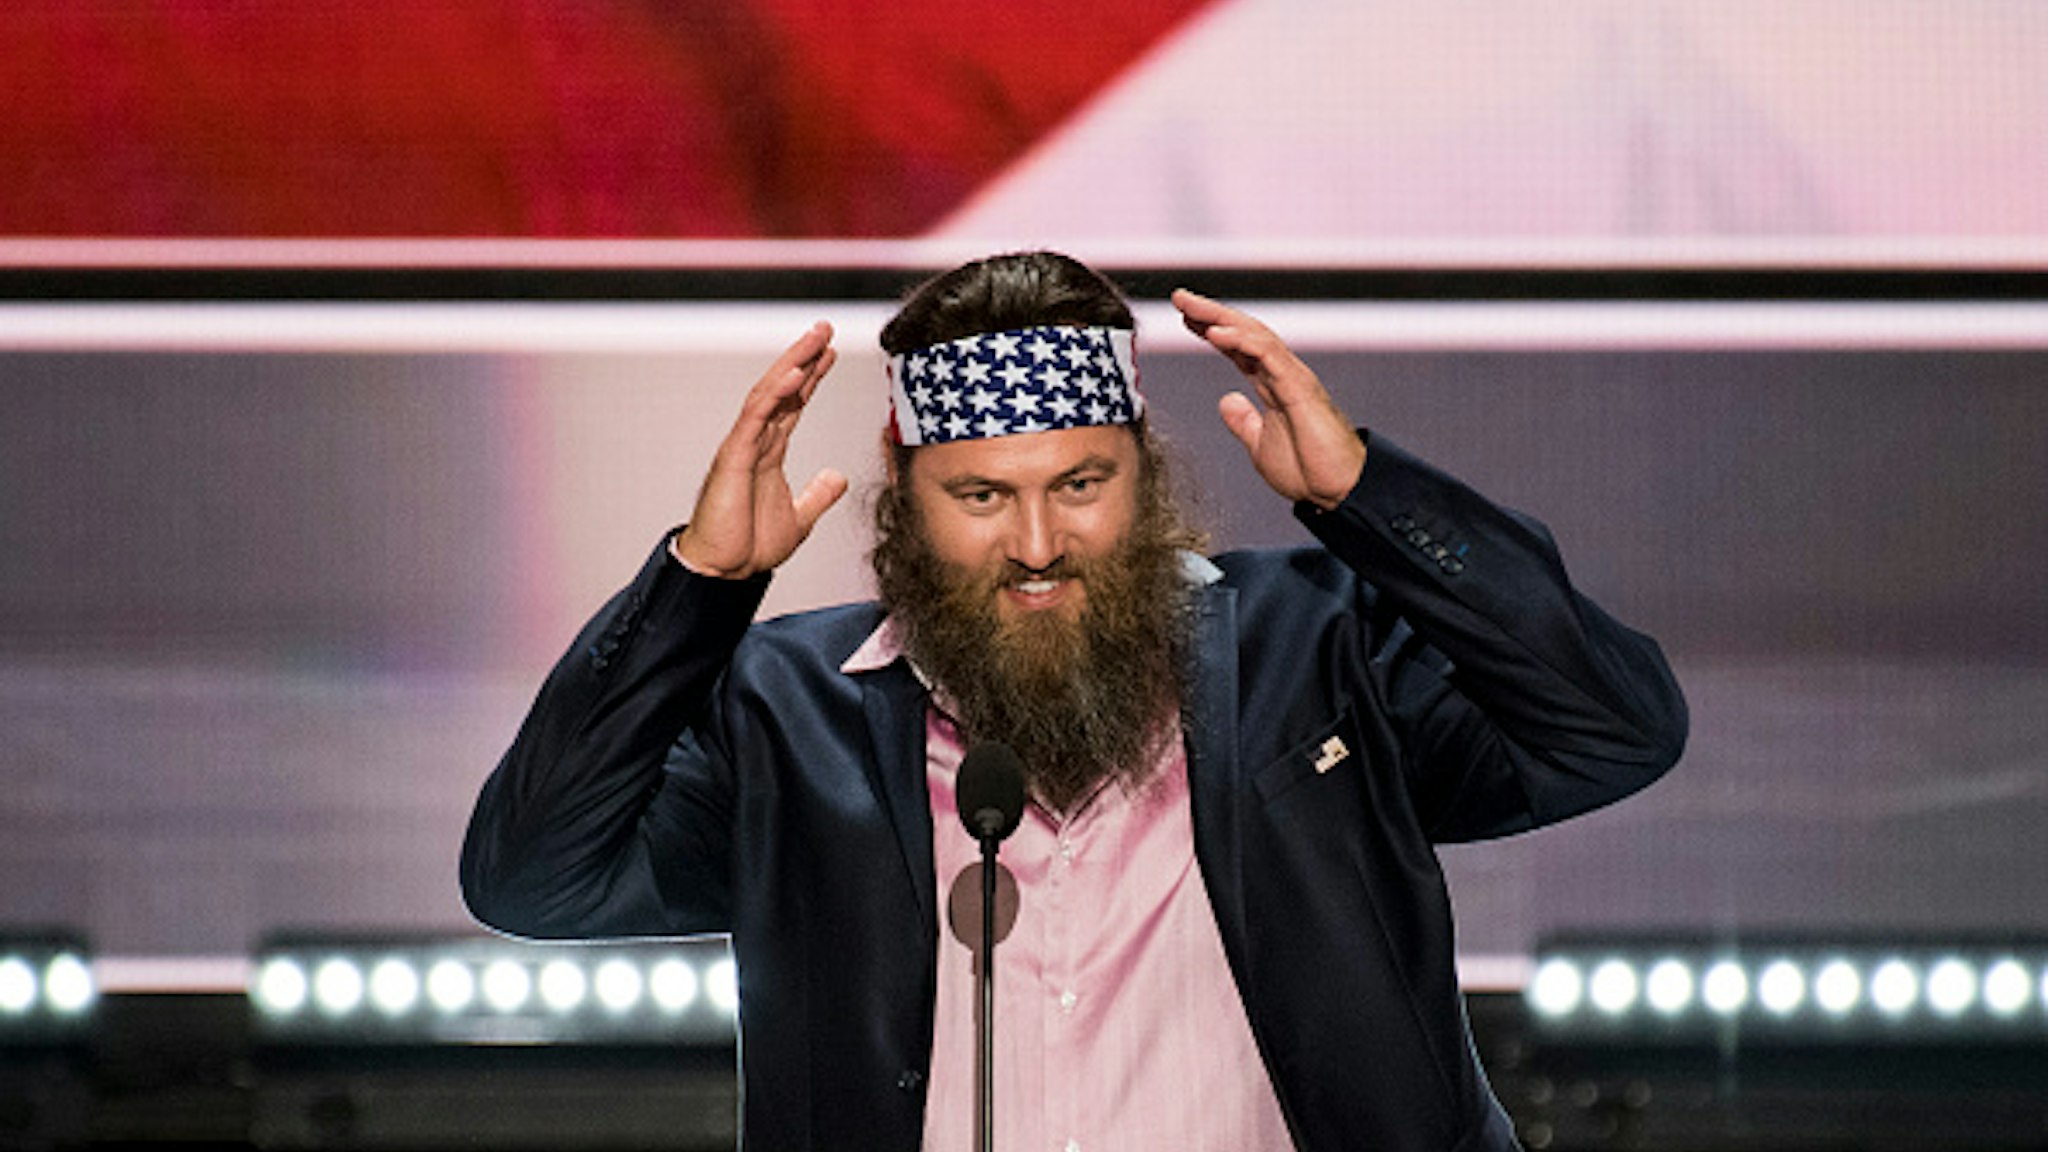 UNITED STATES - JULY 18: Willie Robertson, of the "Duck Dynasty" television show, speaks at the 2016 Republican National Convention in Cleveland, Ohio on Monday, July 18, 2016.